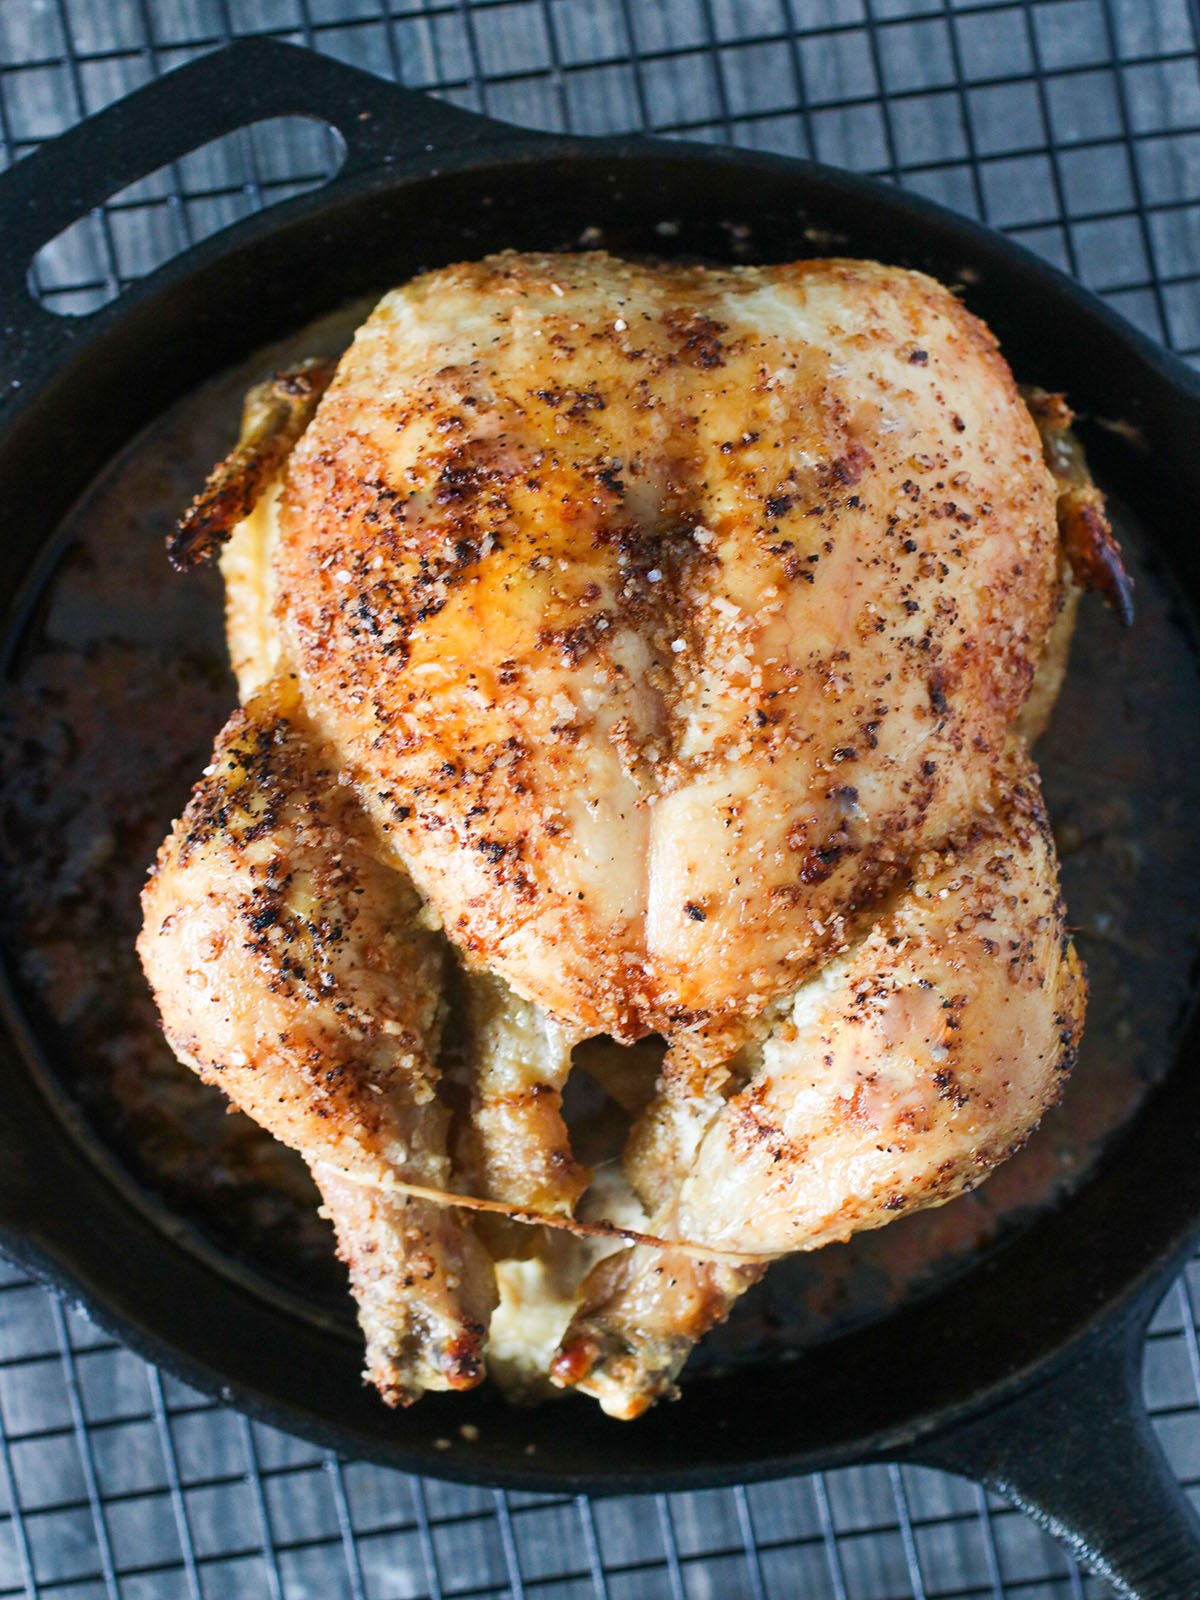 roasted chicken in a cast iron skillet